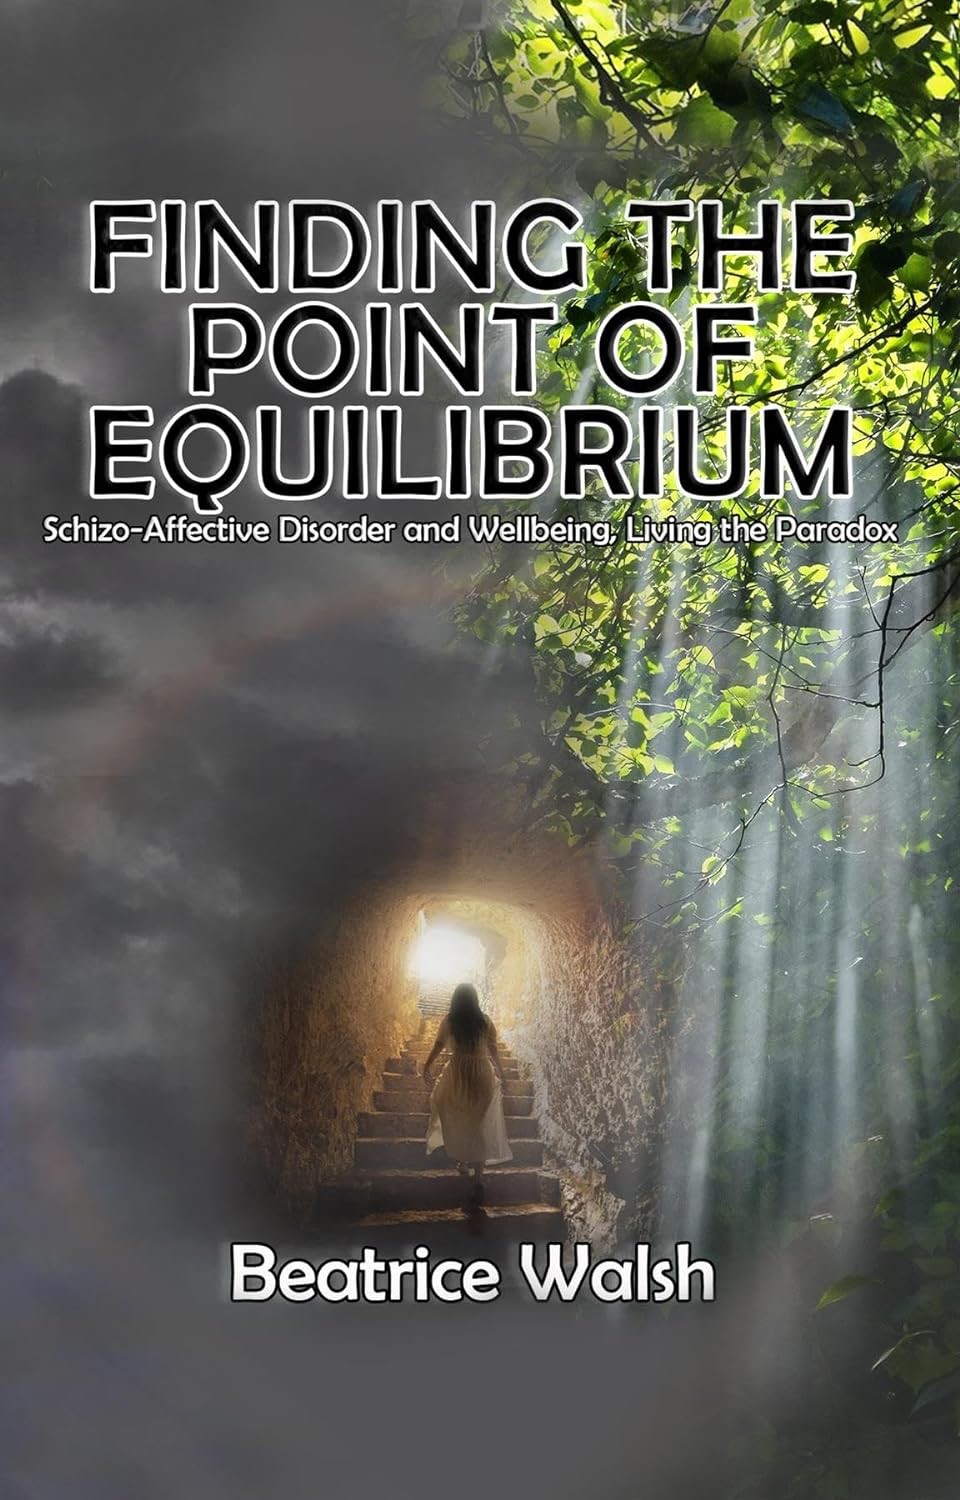 A Journey of Resilience and Rediscovery: Beatrice Walsh's "Finding the Point of Equilibrium"